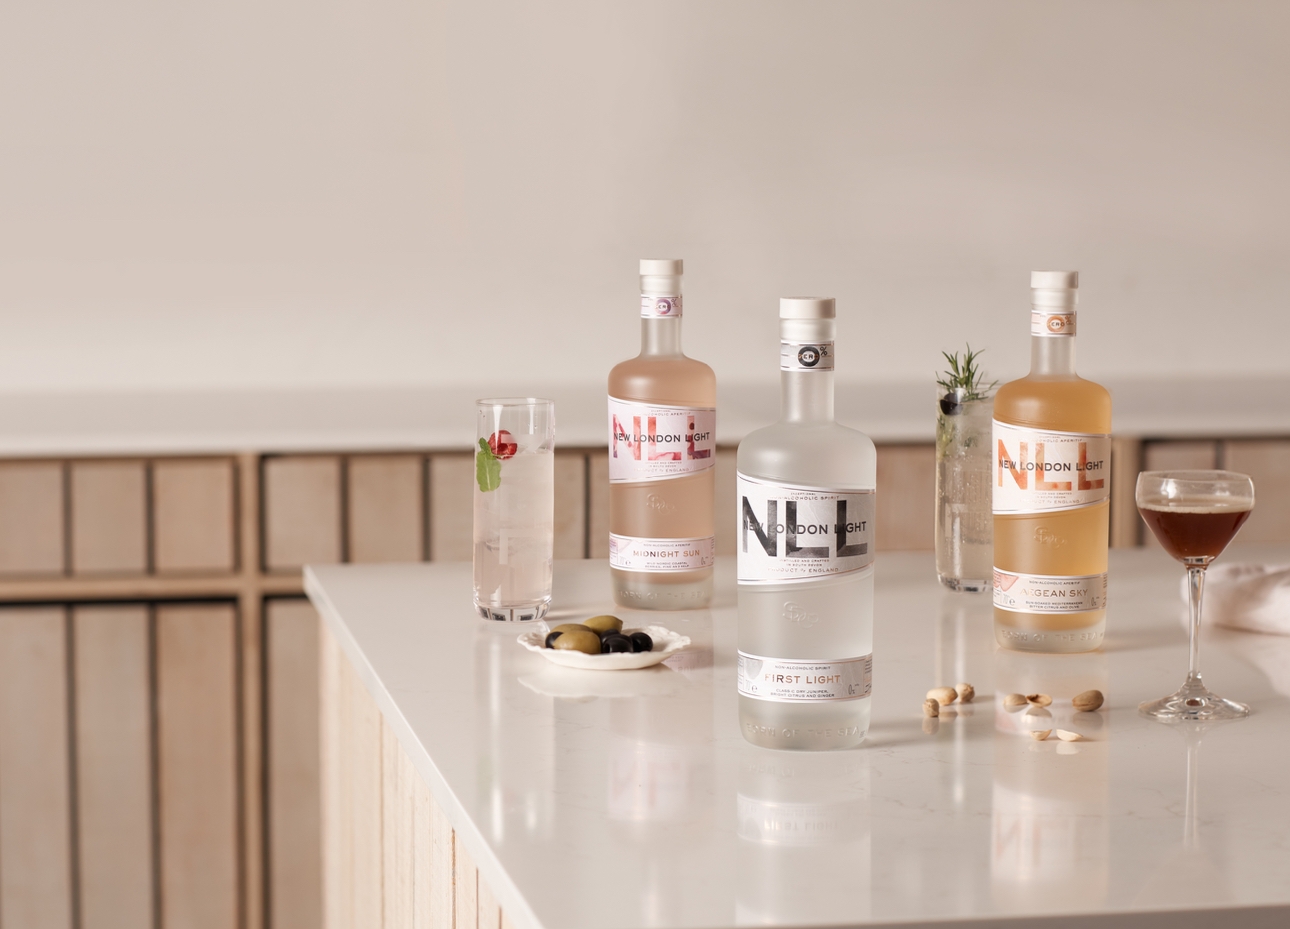 New London Light varieties from the Salcombe Distilling Co